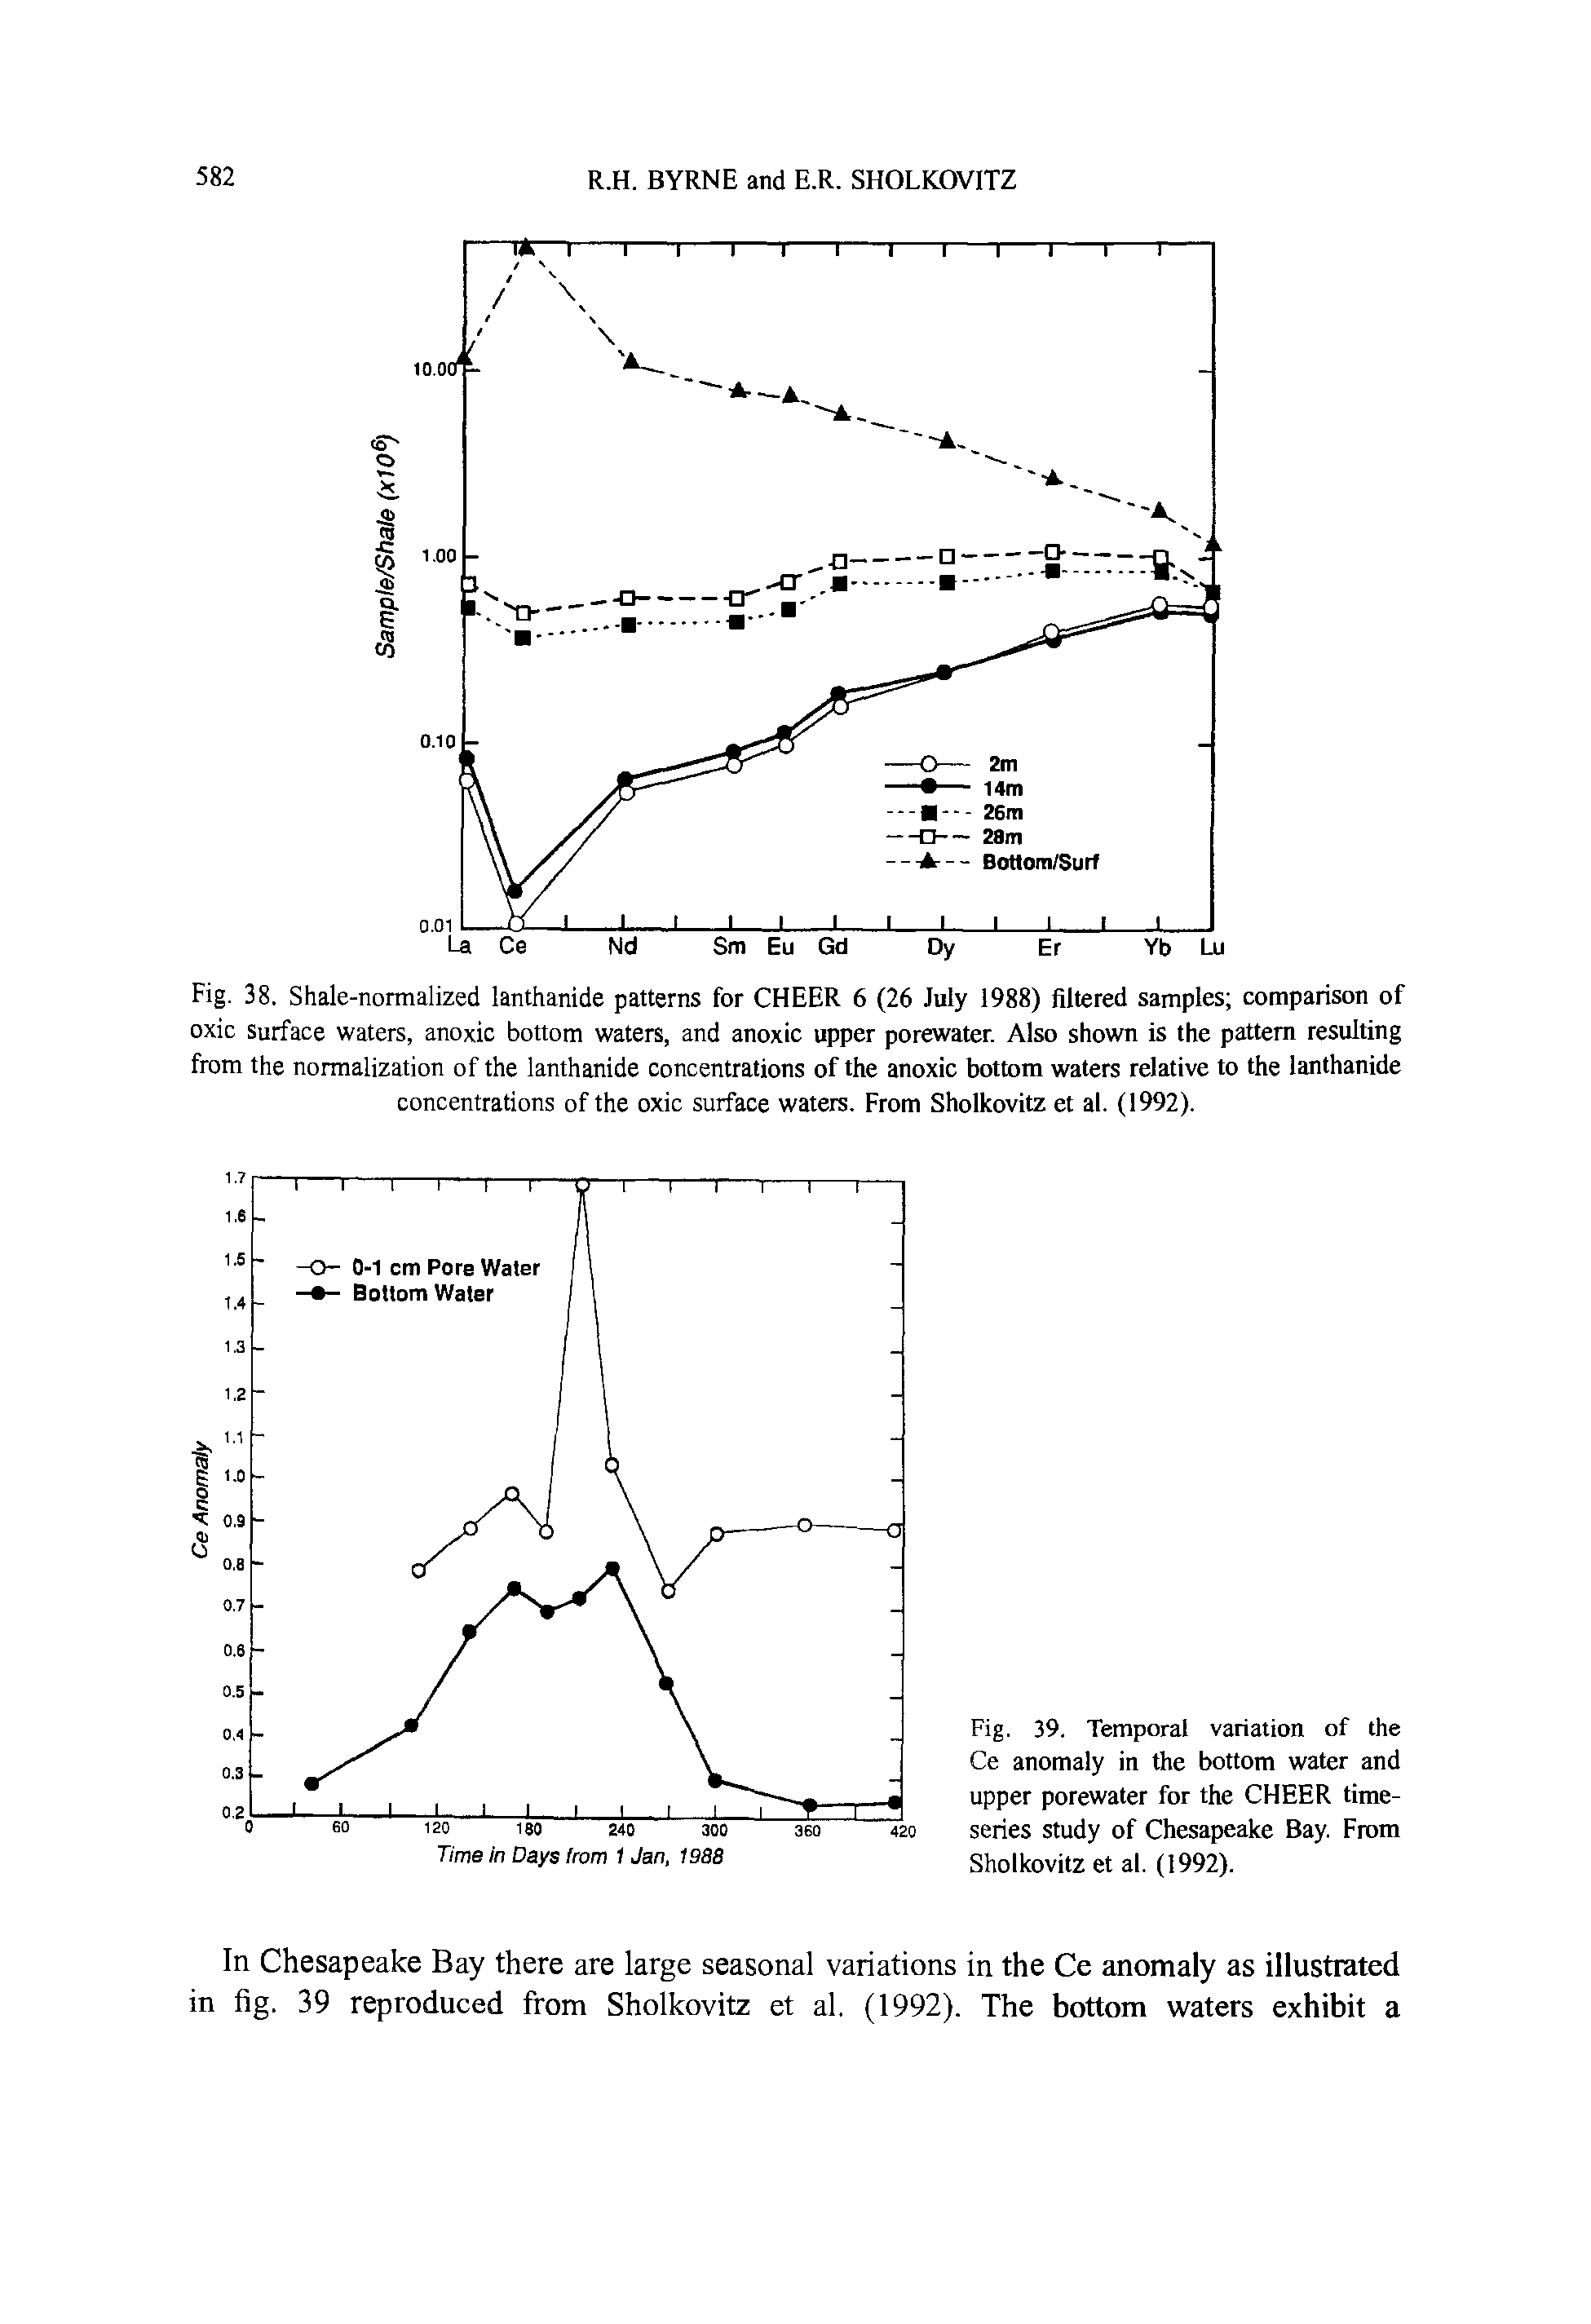 Fig. 38. Shale-normalized lanthanide patterns for CHEER 6 (26 July 1988) filtered samples comparison of oxic Surface waters, anoxic bottom waters, and anoxic upper porewater. Also shown is the pattern resulting from the normalization of the lanthanide concentrations of the anoxic bottom waters relative to the lanthanide concentrations of the oxic surface waters. From Sholkovitz et al. (1992).